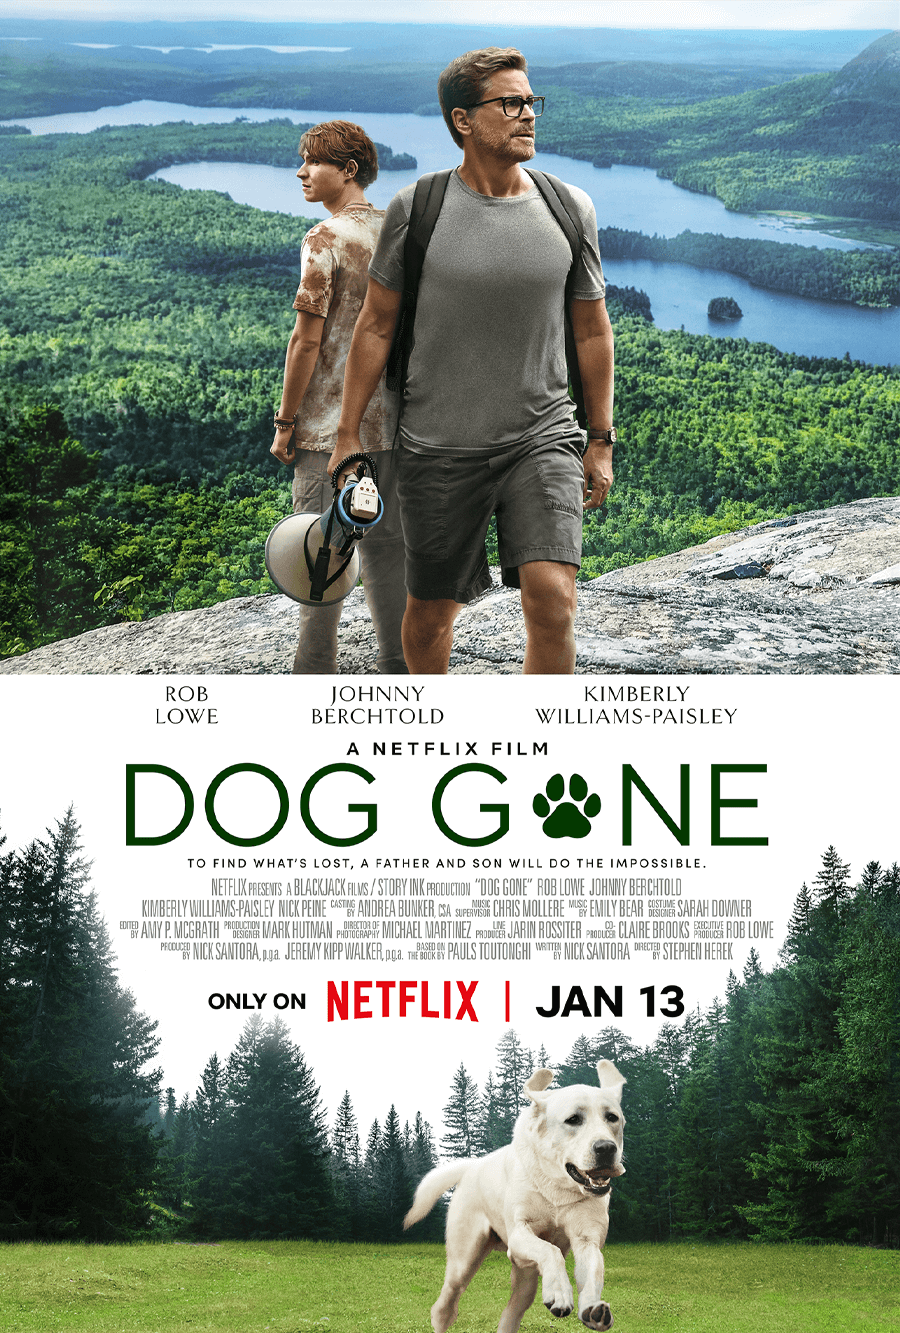 dog gone netflix movie coming to netflix in january 2023 poster